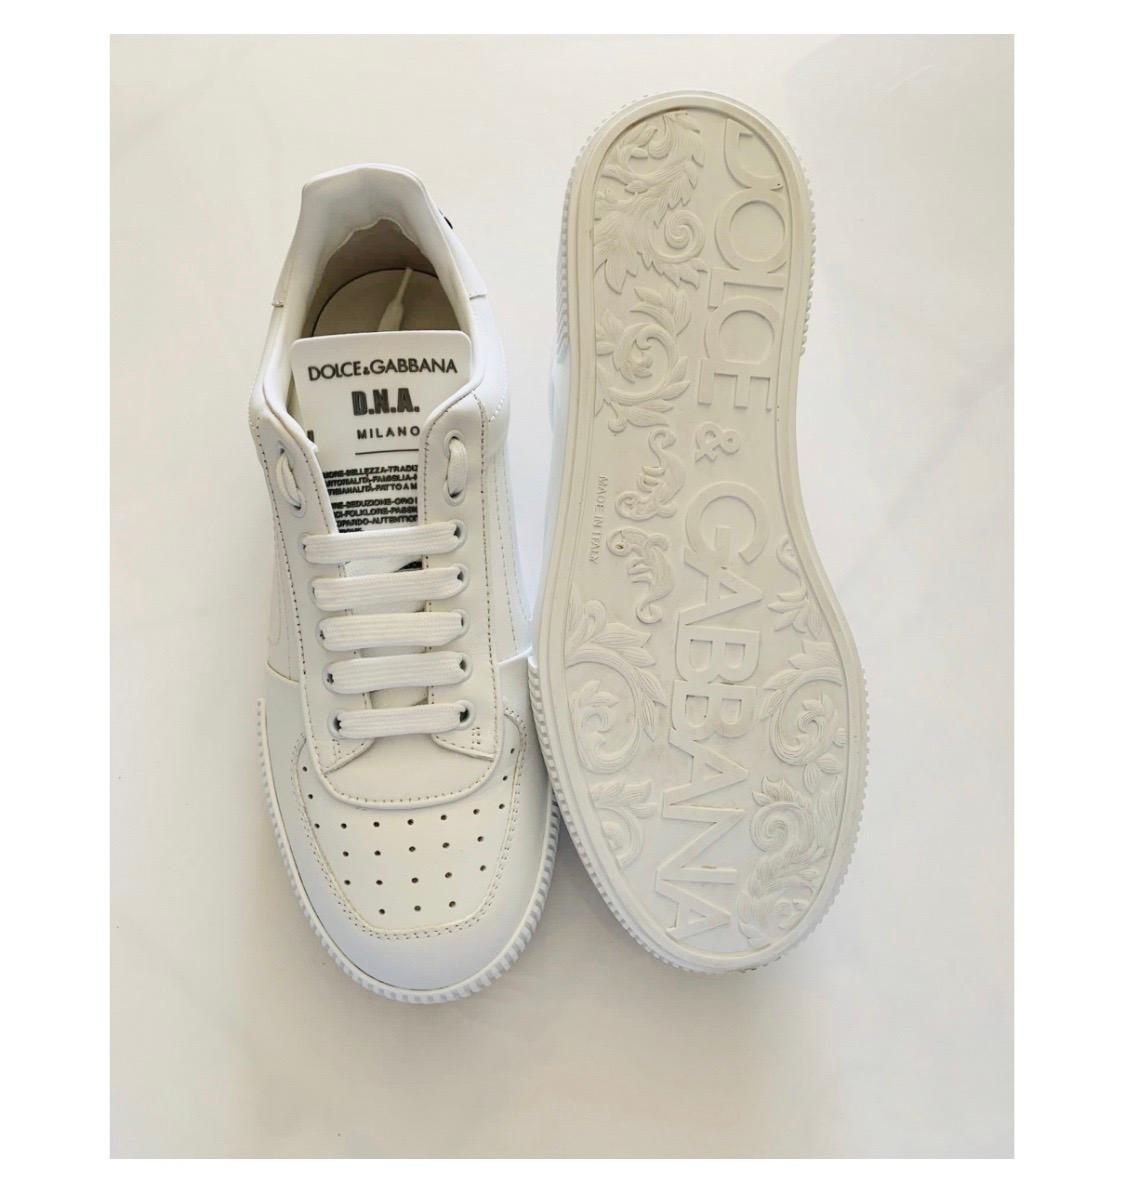  Dolce & Gabbana DNA Men white
leather trainers sneakers

Size 41,5
UK7,5

100% calfskin

New but been tried on few times.
With the original box!

Please check my other DG clothing &

accessories!
